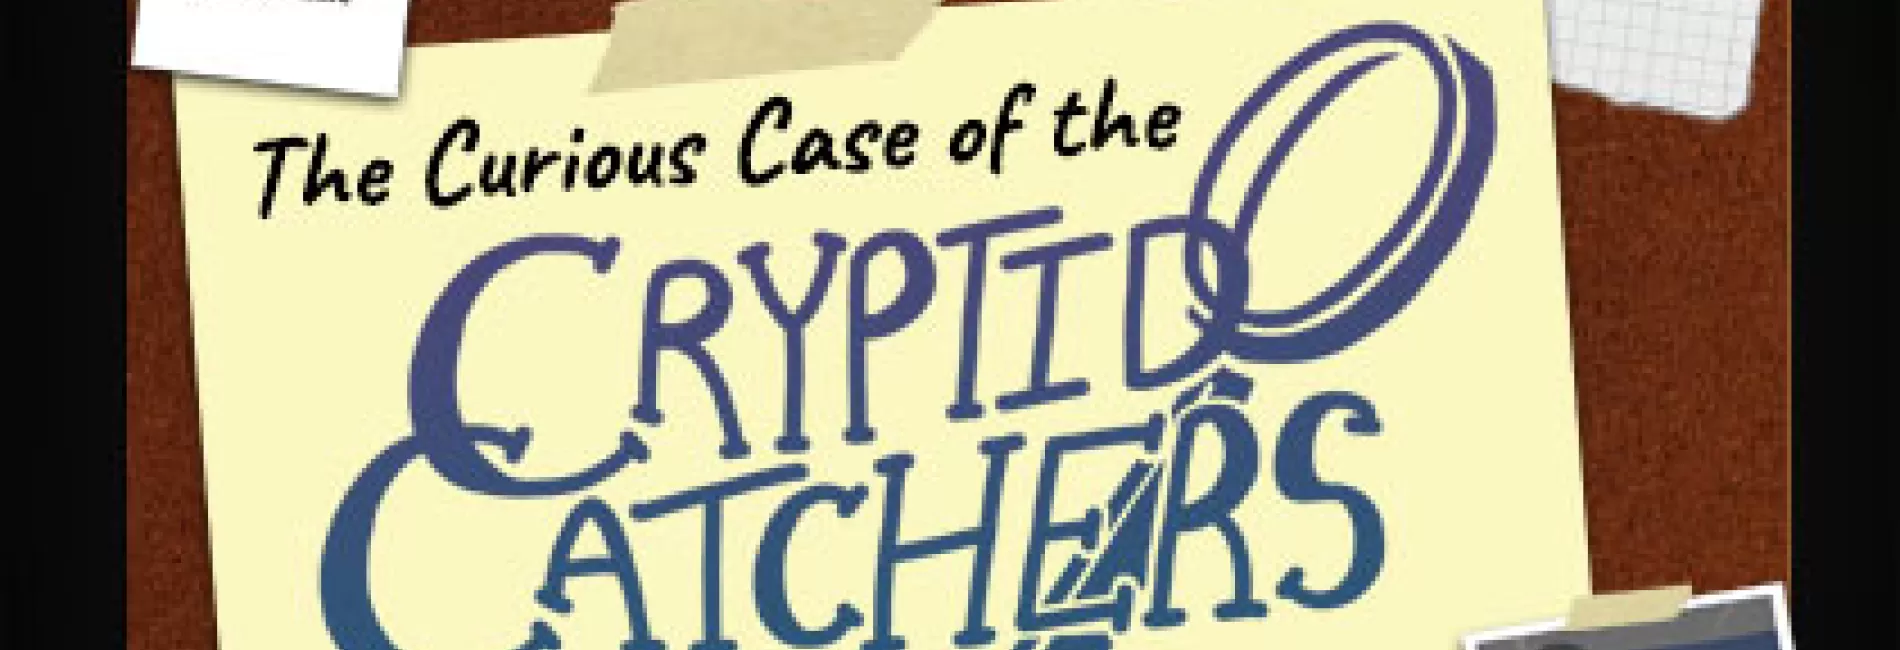 The Curious Case of The Cryptid Catchers